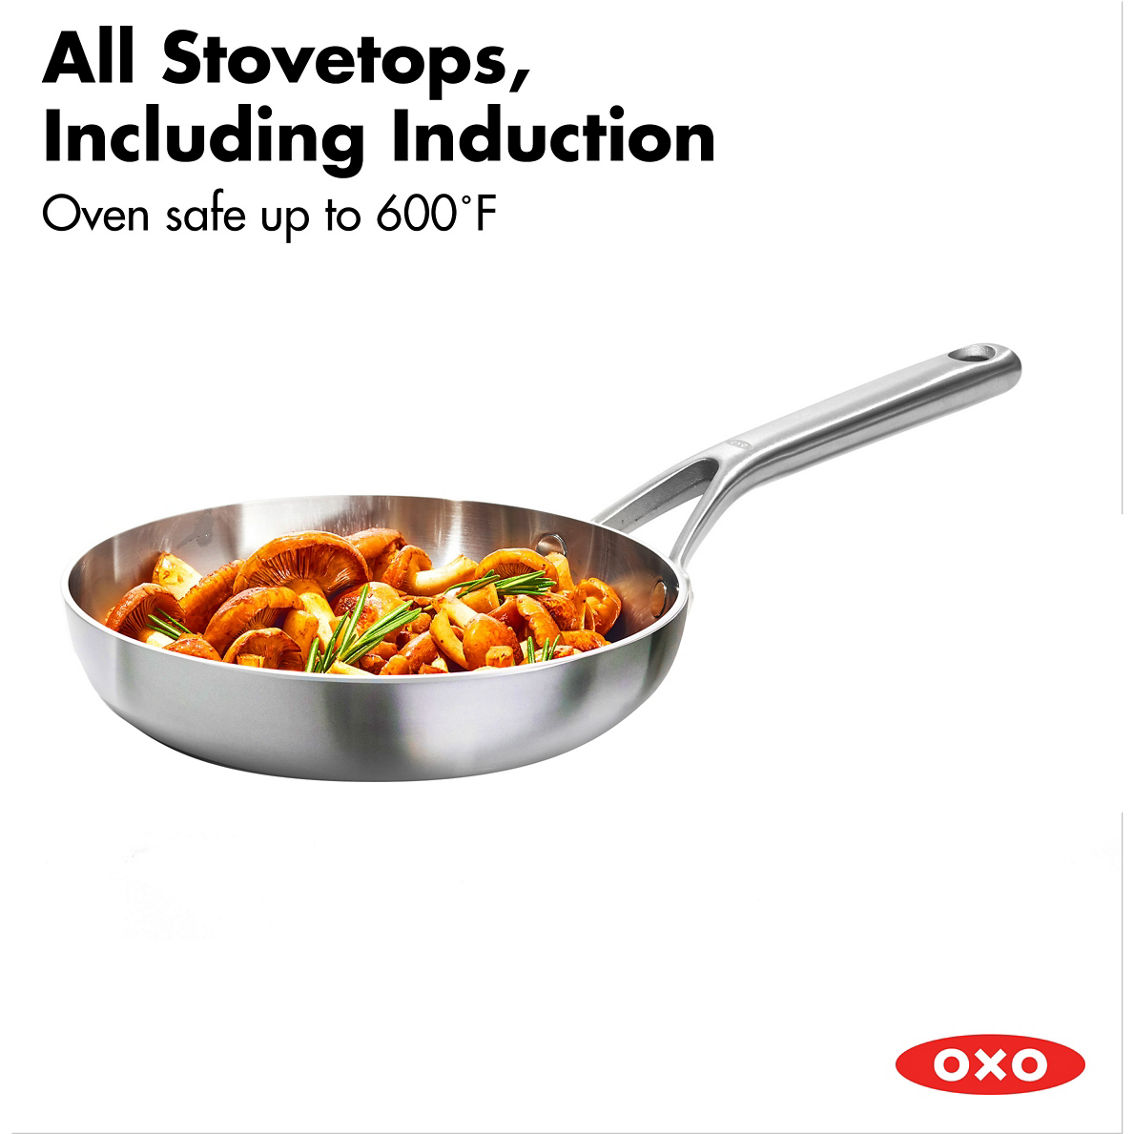 OXO Mira 3-Ply Stainless Steel Frying Pan - Image 4 of 6